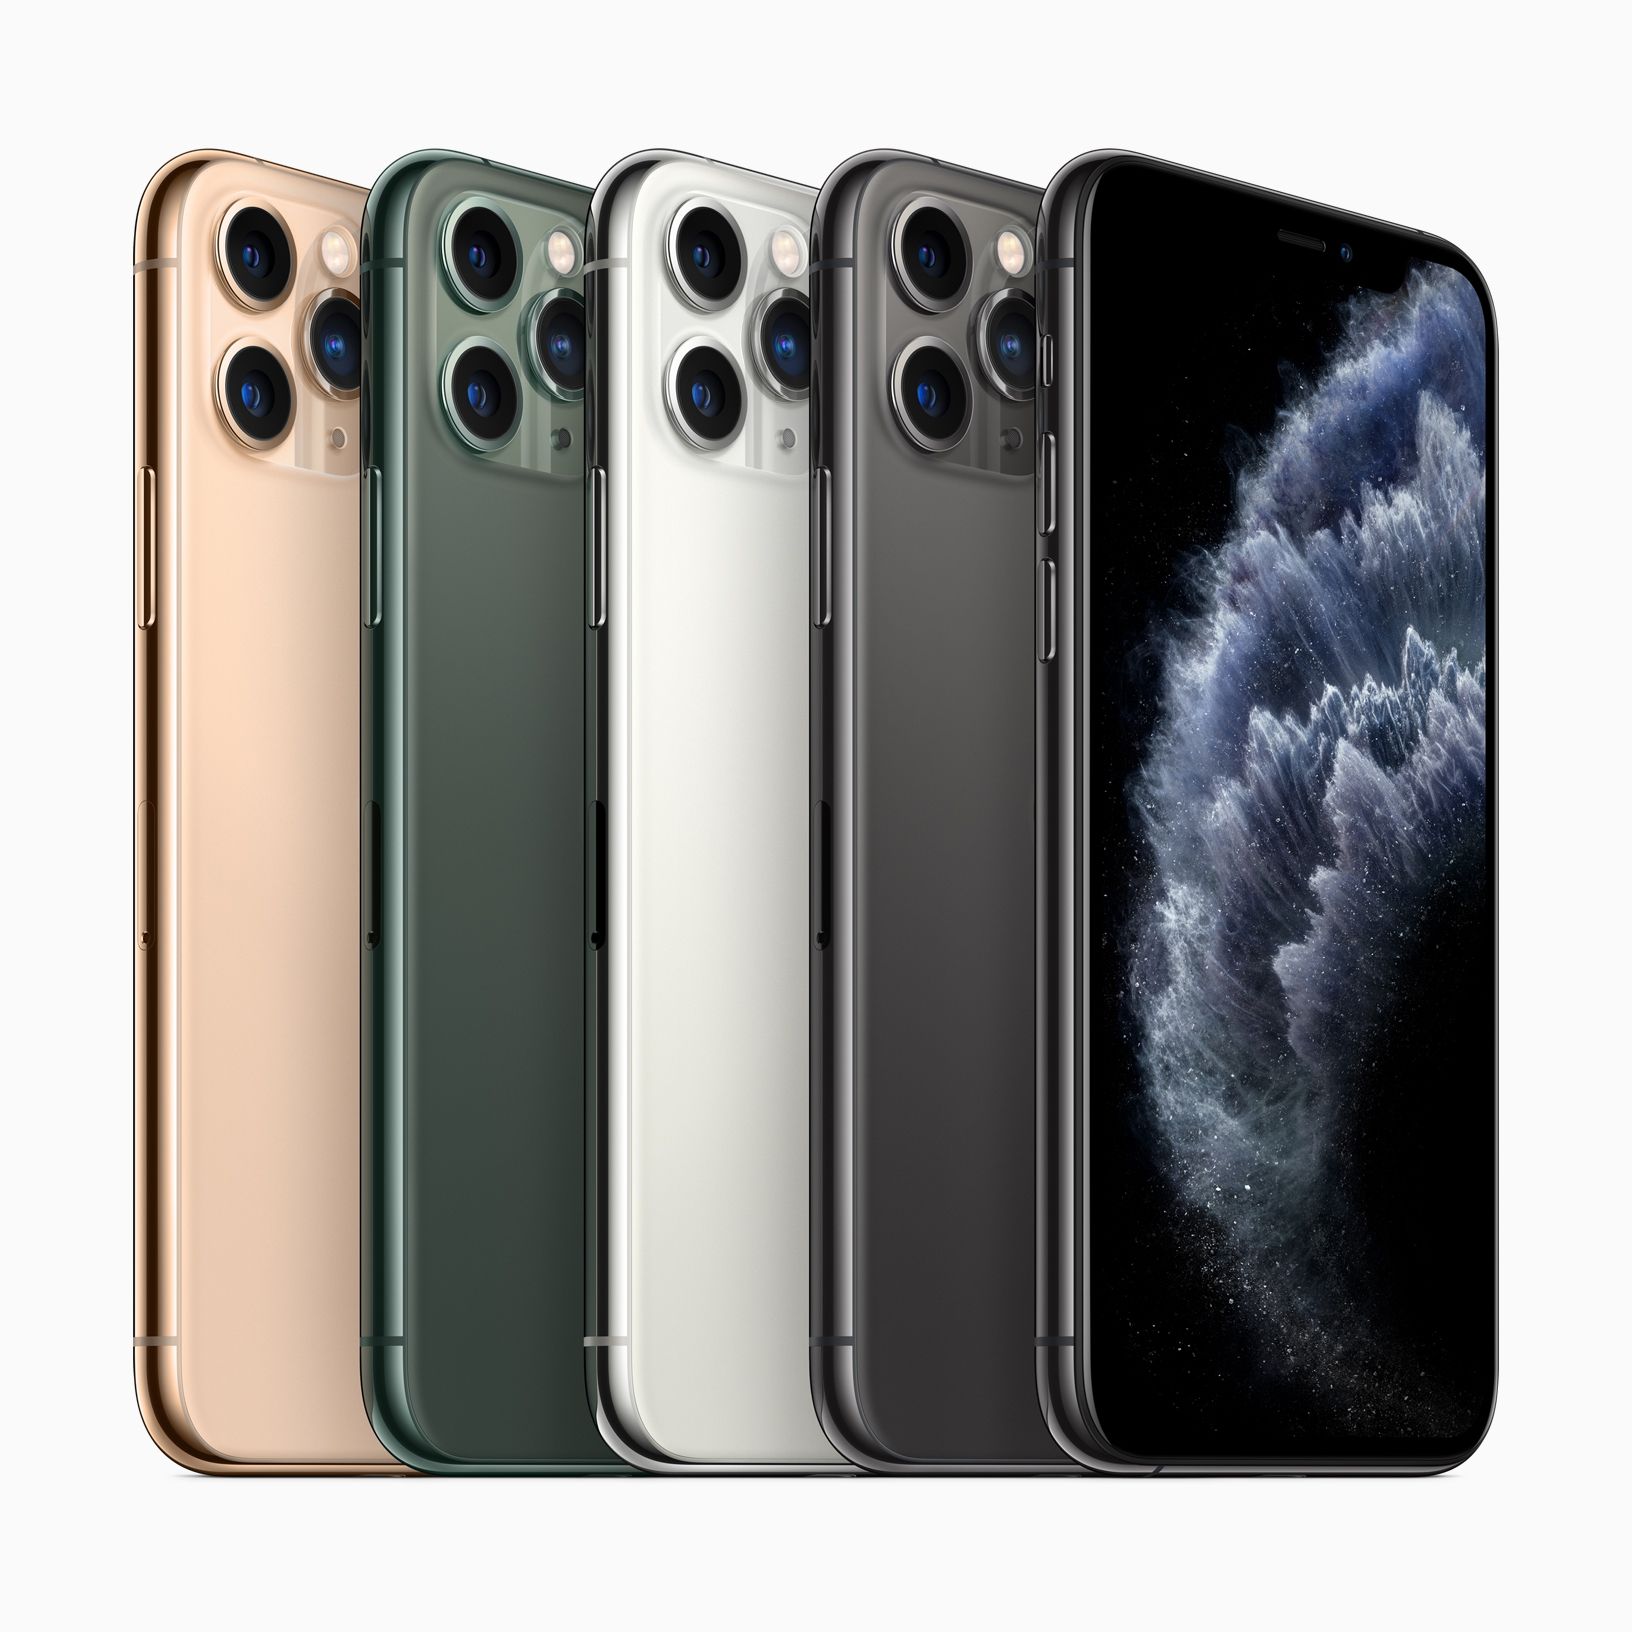 2020 iPhone Reportedly to Sport on-screen Touch ID via Qualcomm Sensor